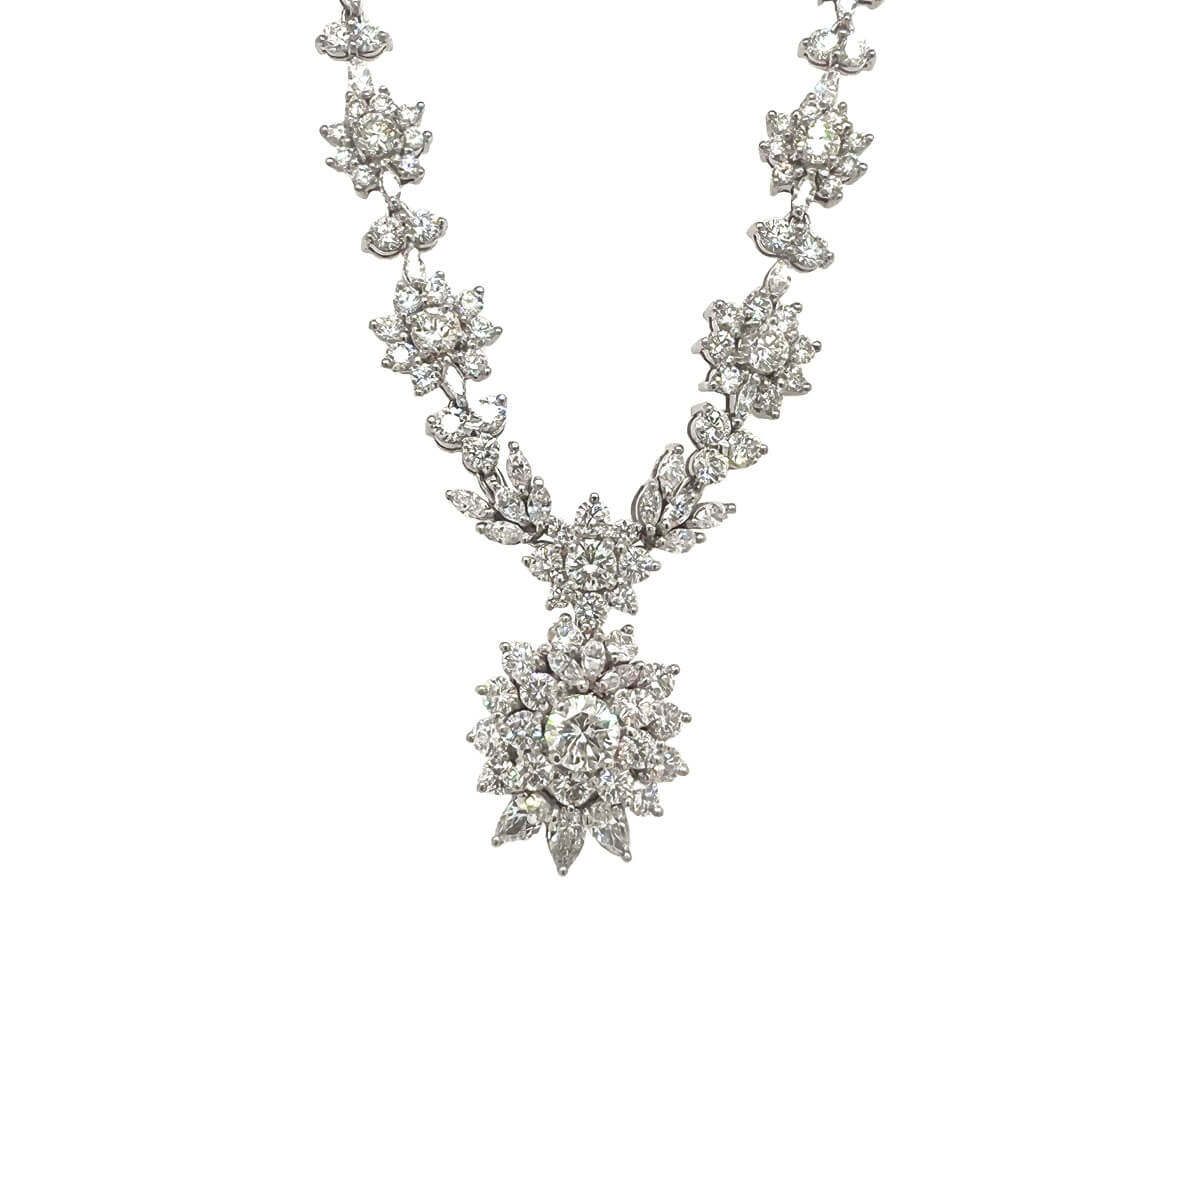 12.31ct Round Brilliant Cut & Marquise Shaped Diamond Necklace